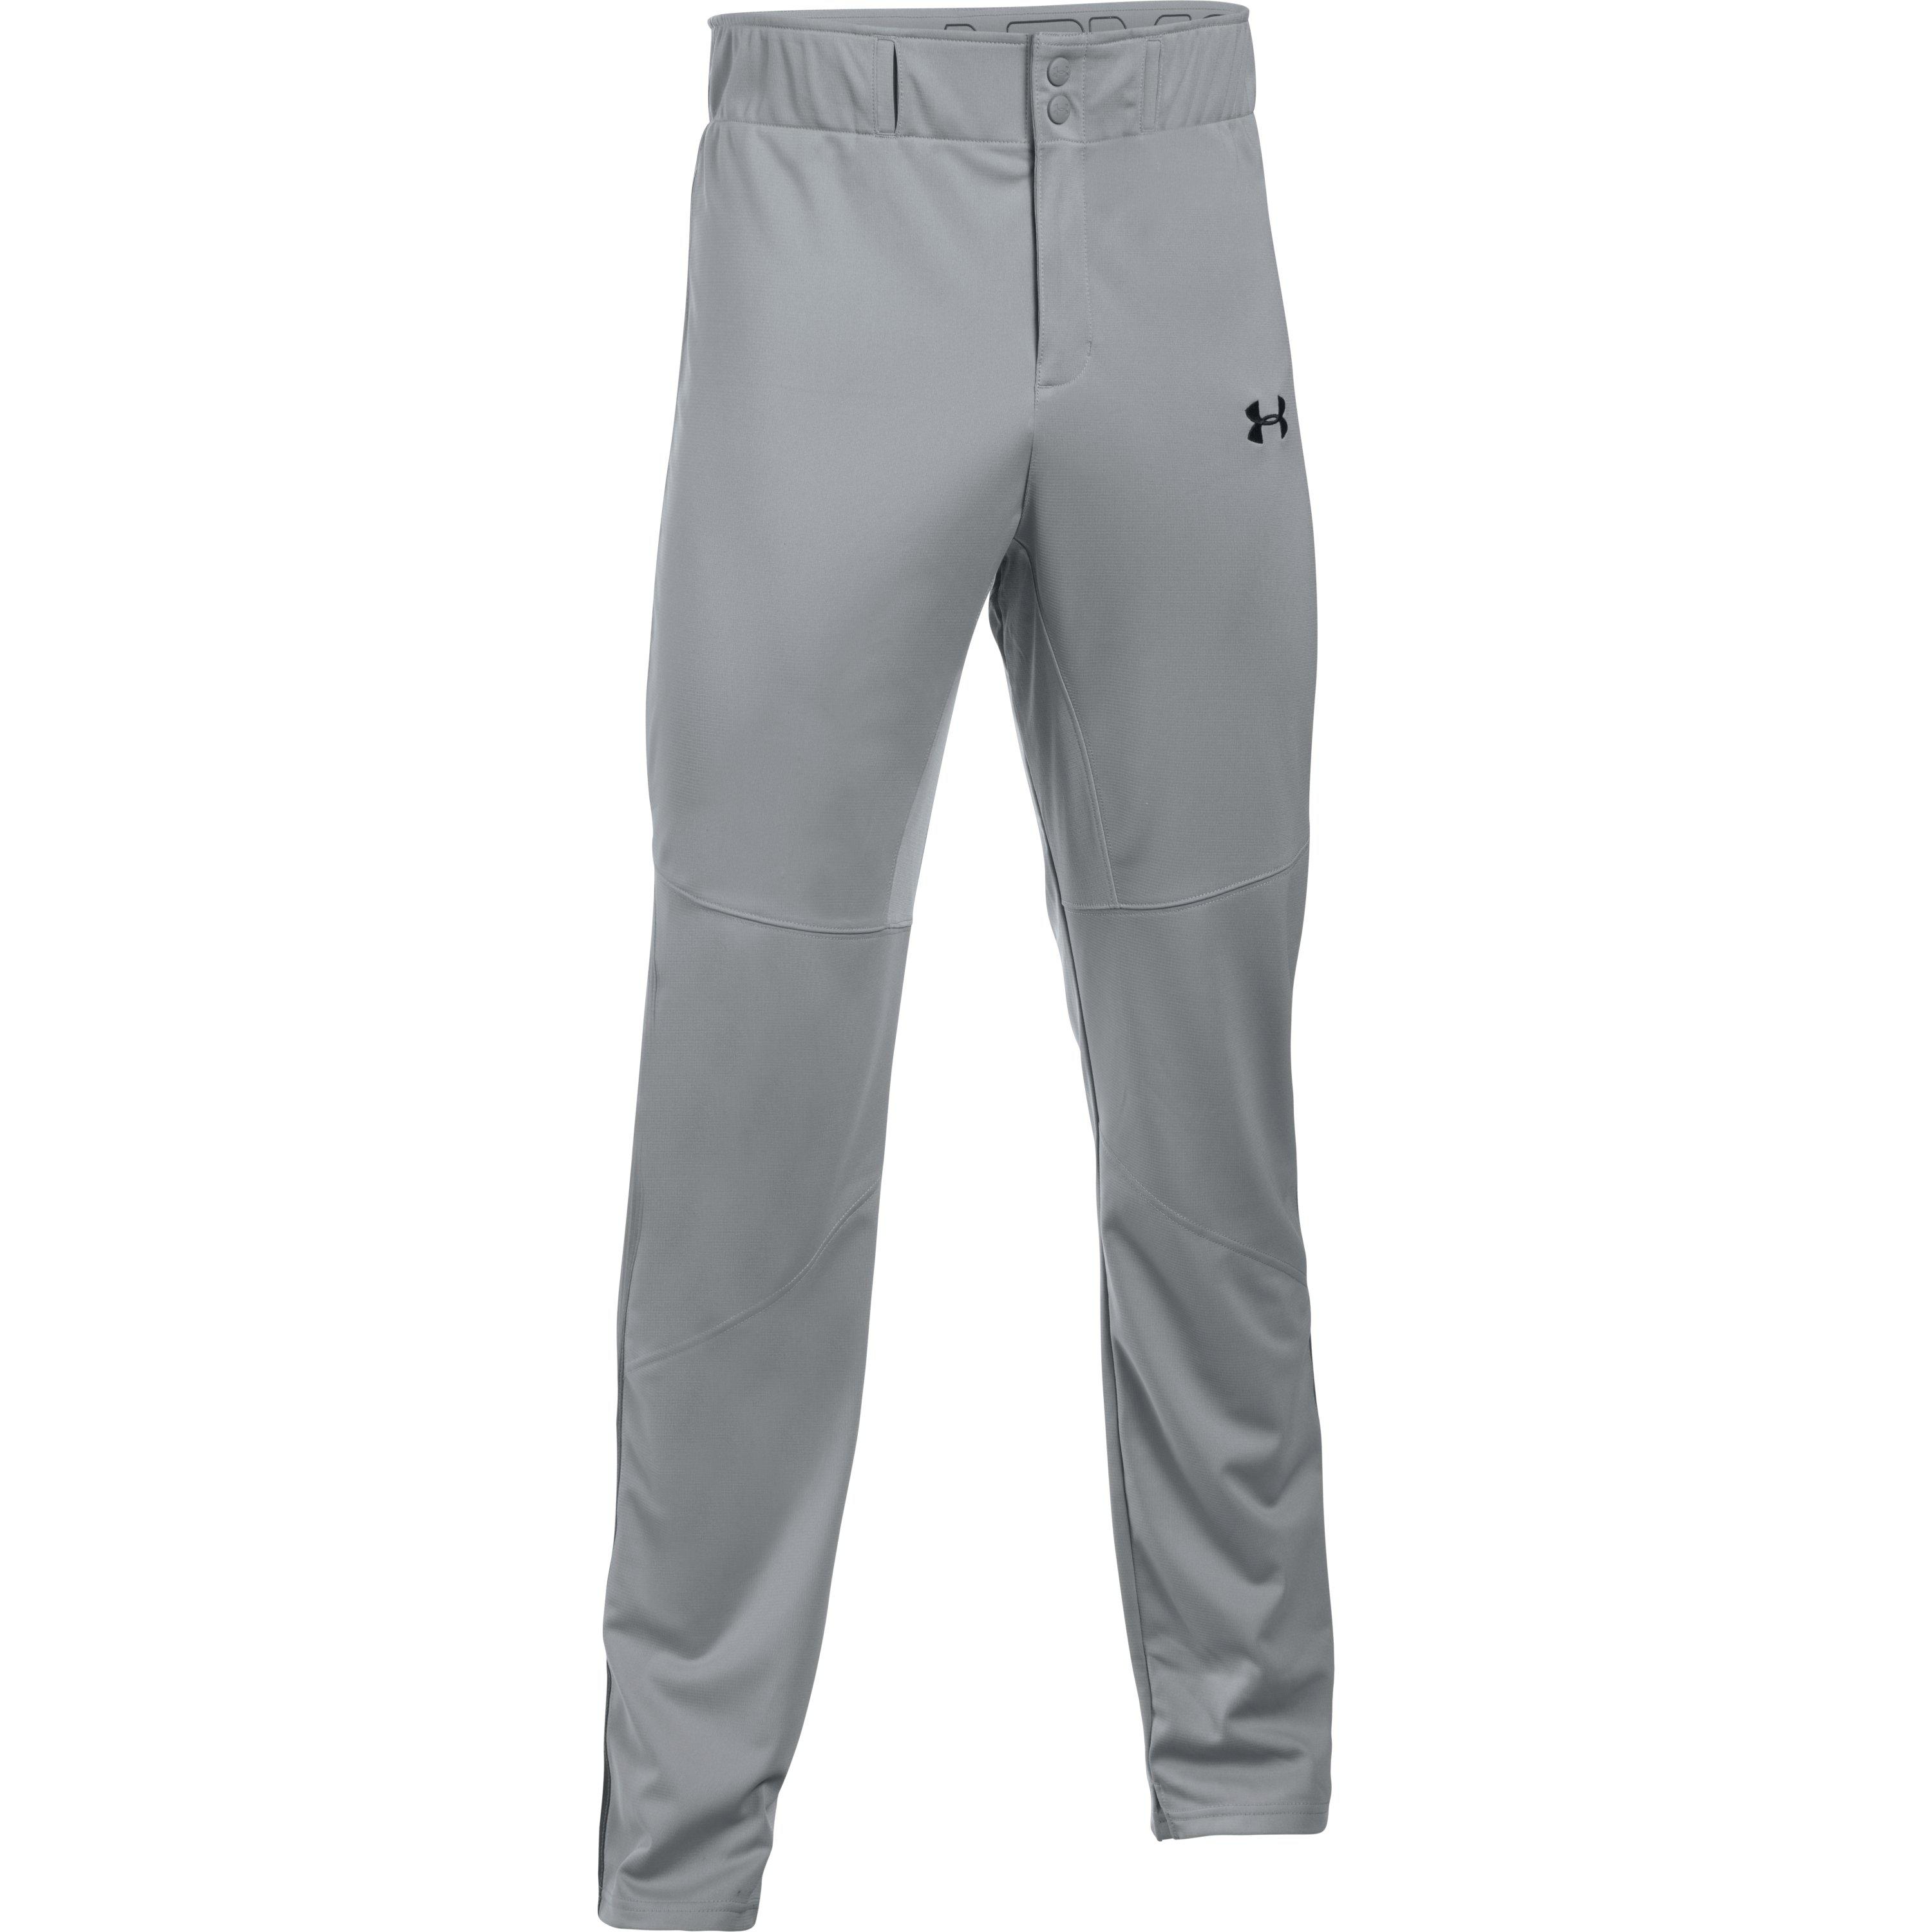 Under Armour Men's Ua Lead Off Vented Baseball Pants in Gray for Men - Lyst